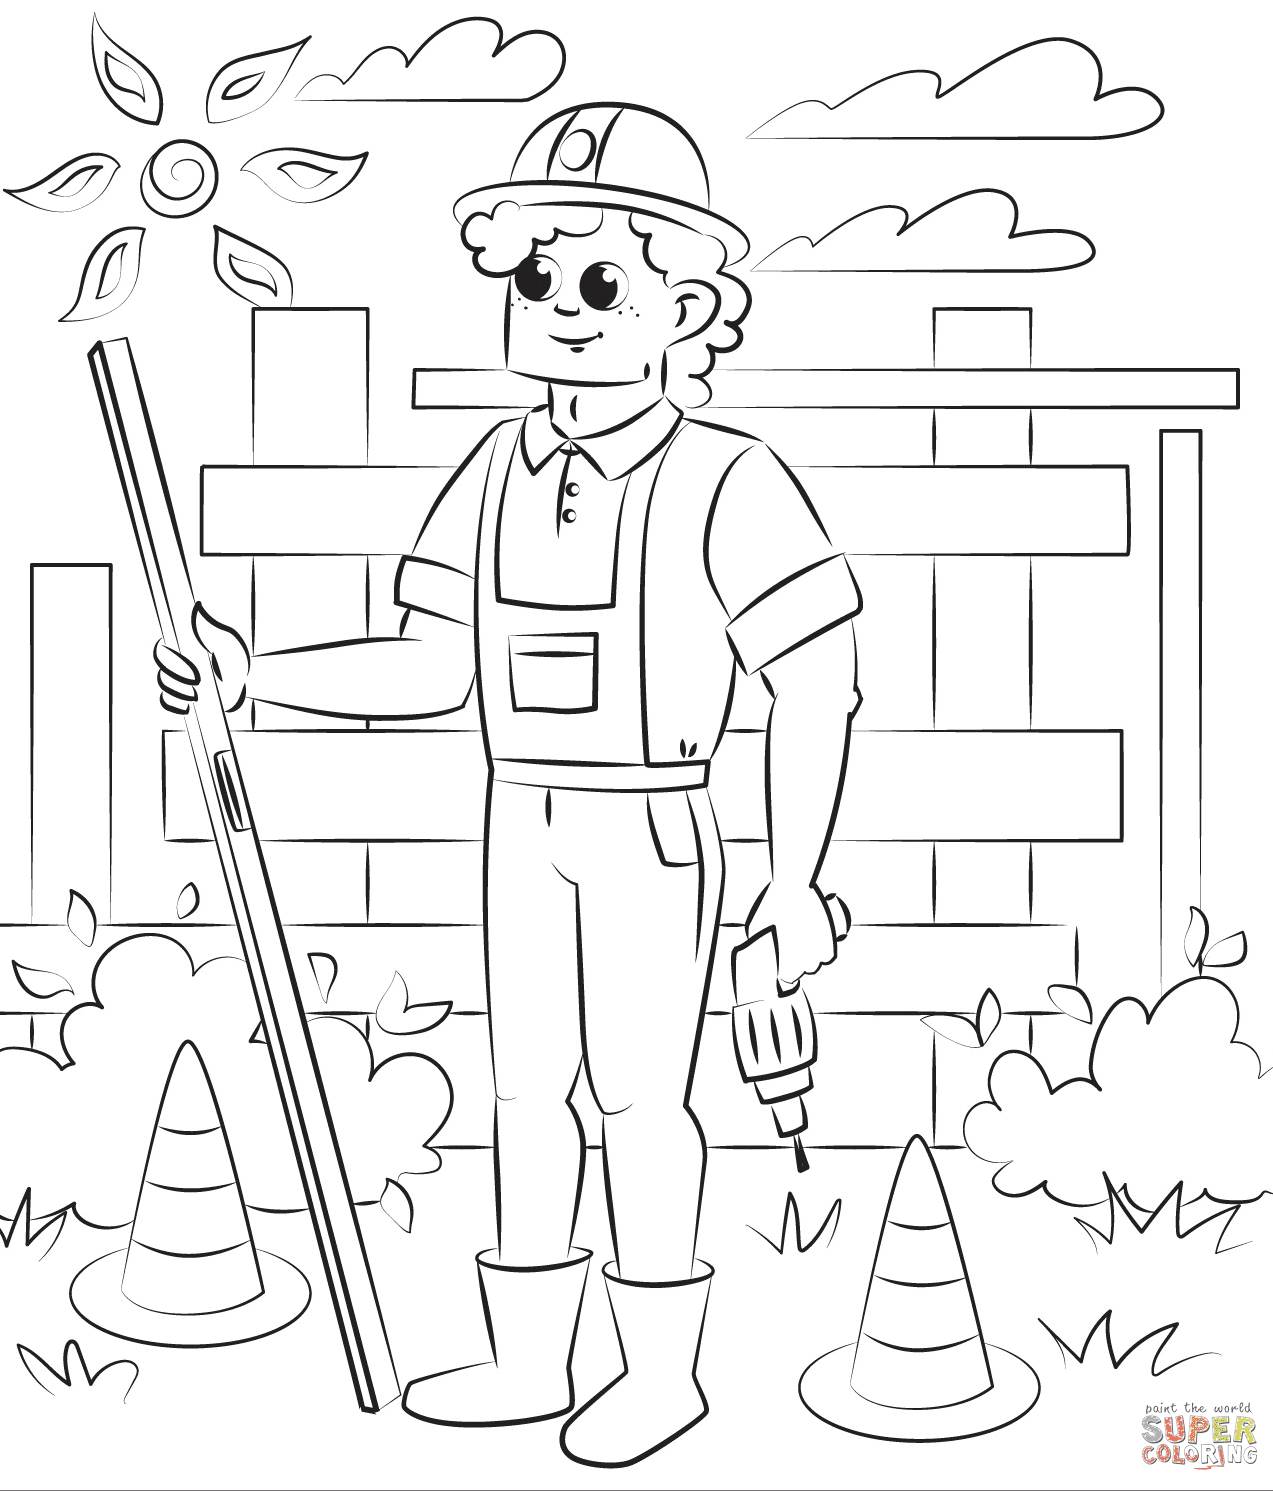 Printable Construction Worker Coloring Pages